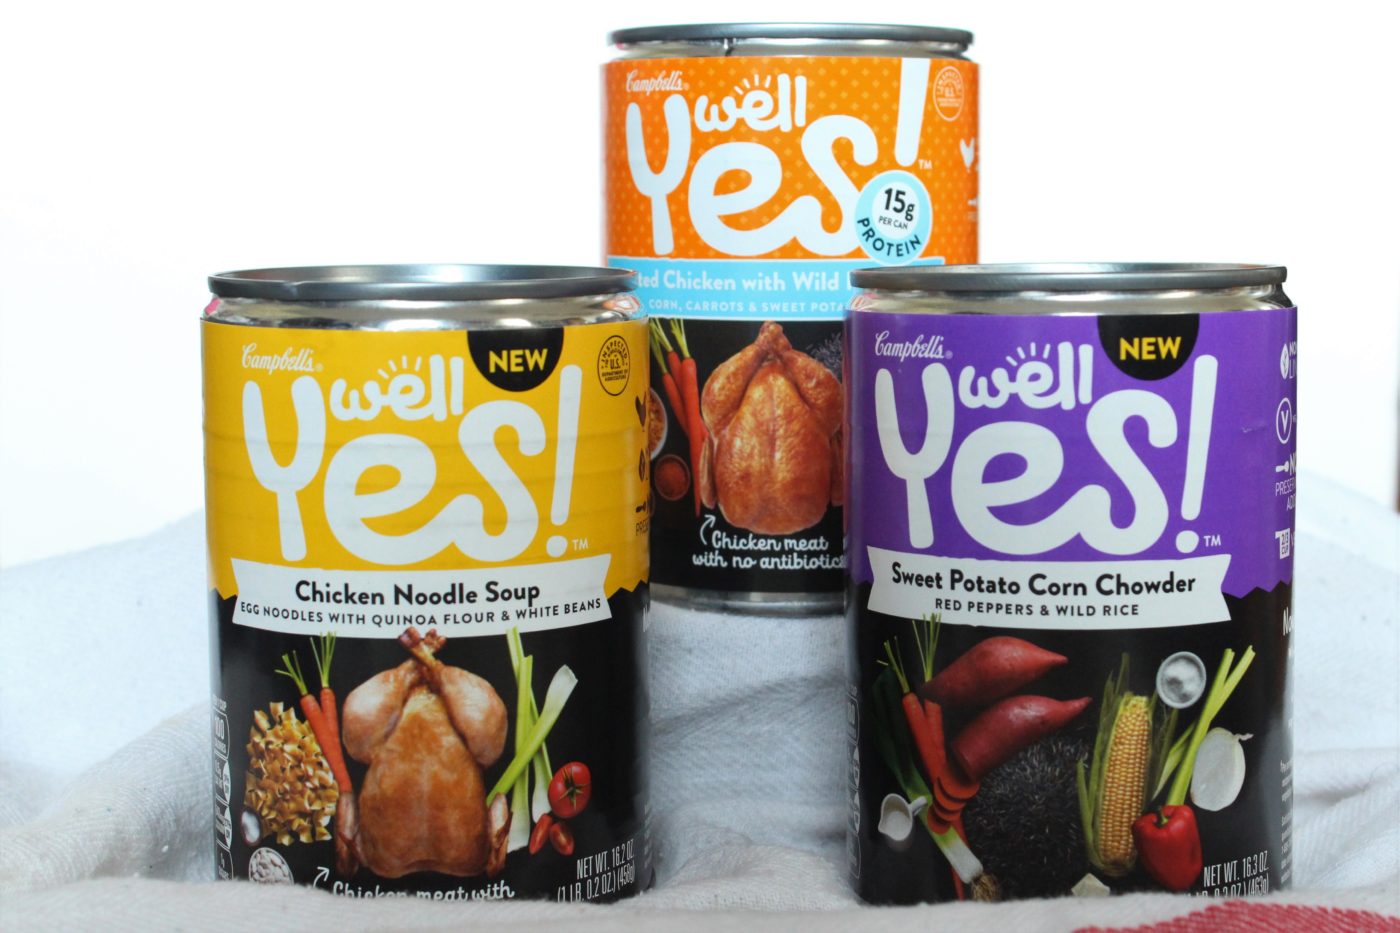 Moment of yes with Campbell's Well Yes! Soup.